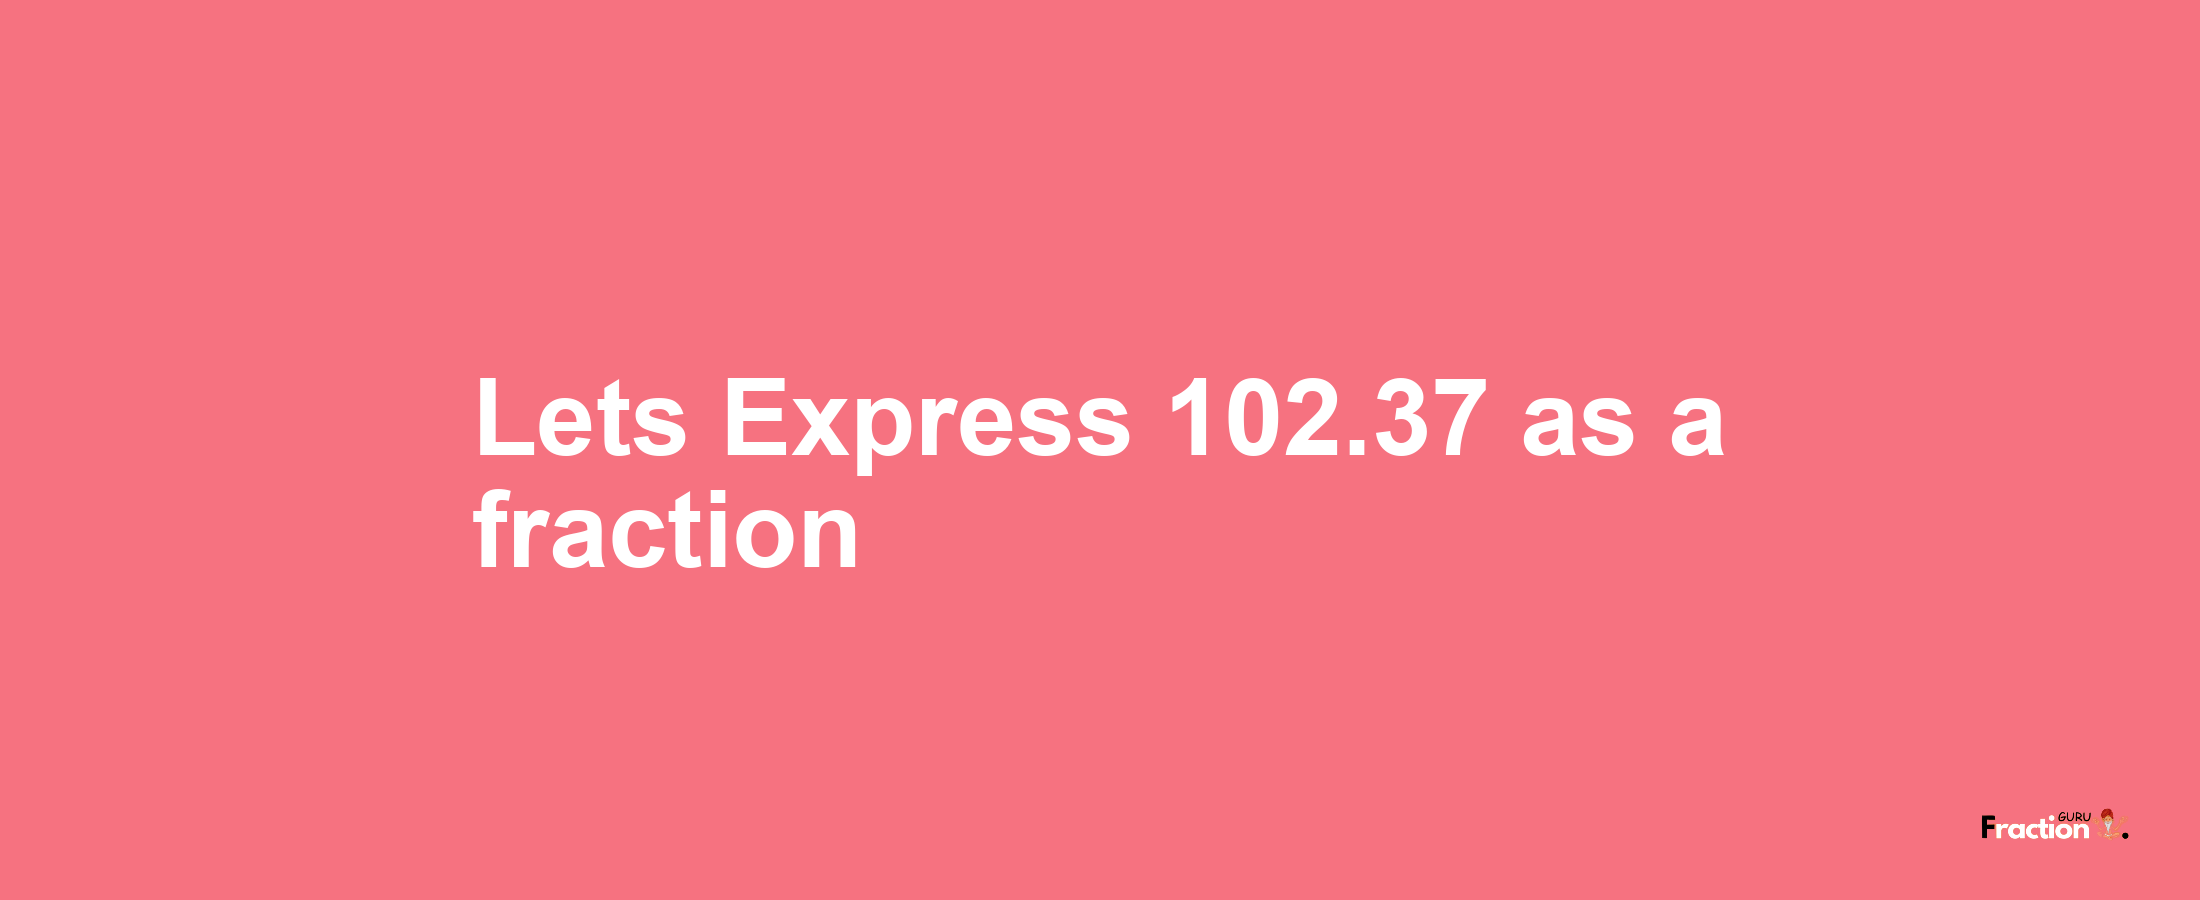 Lets Express 102.37 as afraction